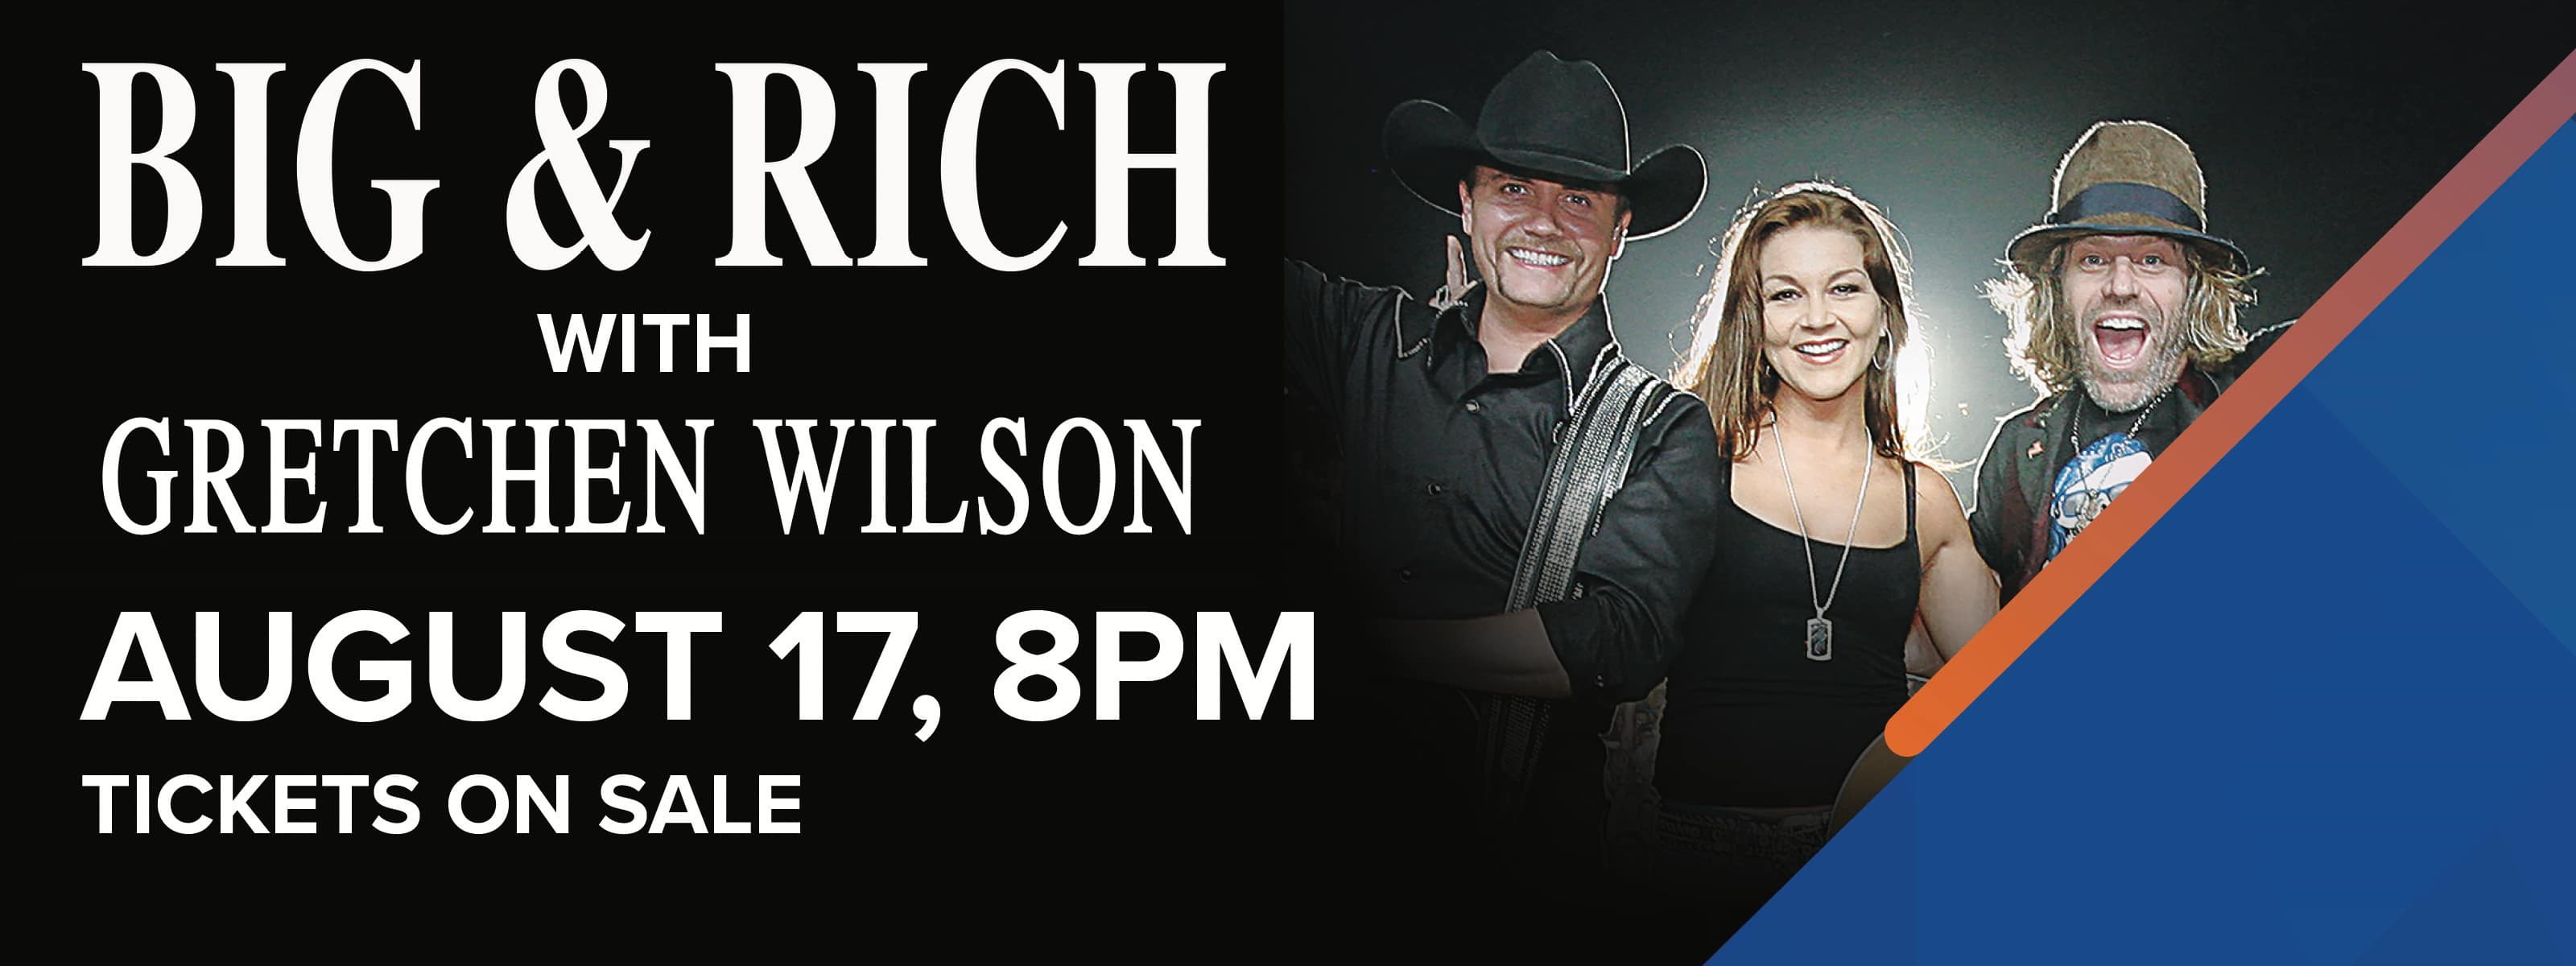 Big & Rich with Gretchen Wilson - August 17, 8pm Tickets On Sale Now